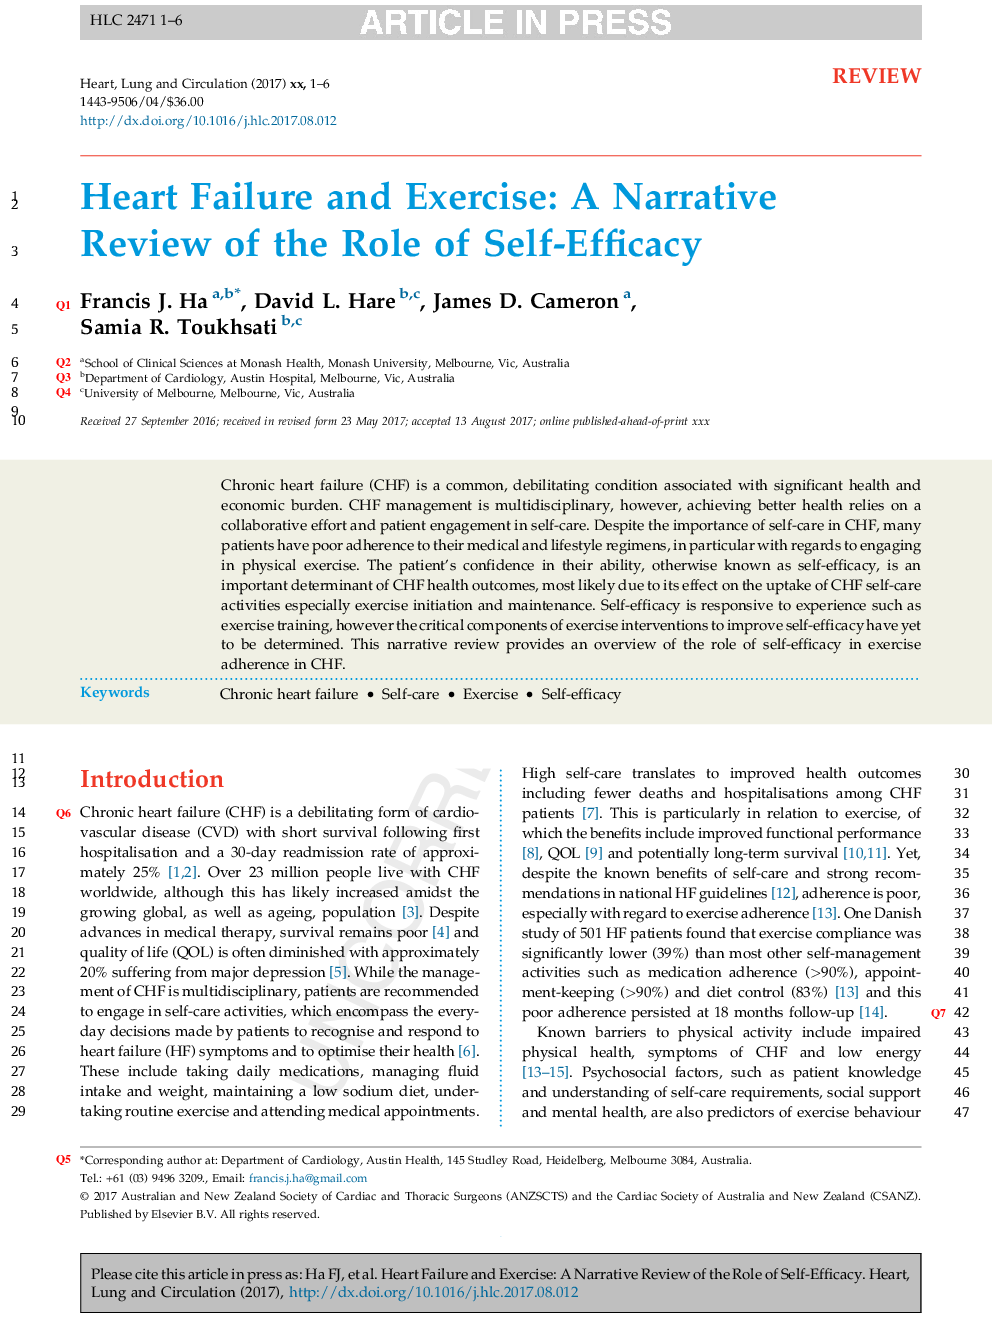 Heart Failure and Exercise: A Narrative Review of the Role of Self-Efficacy